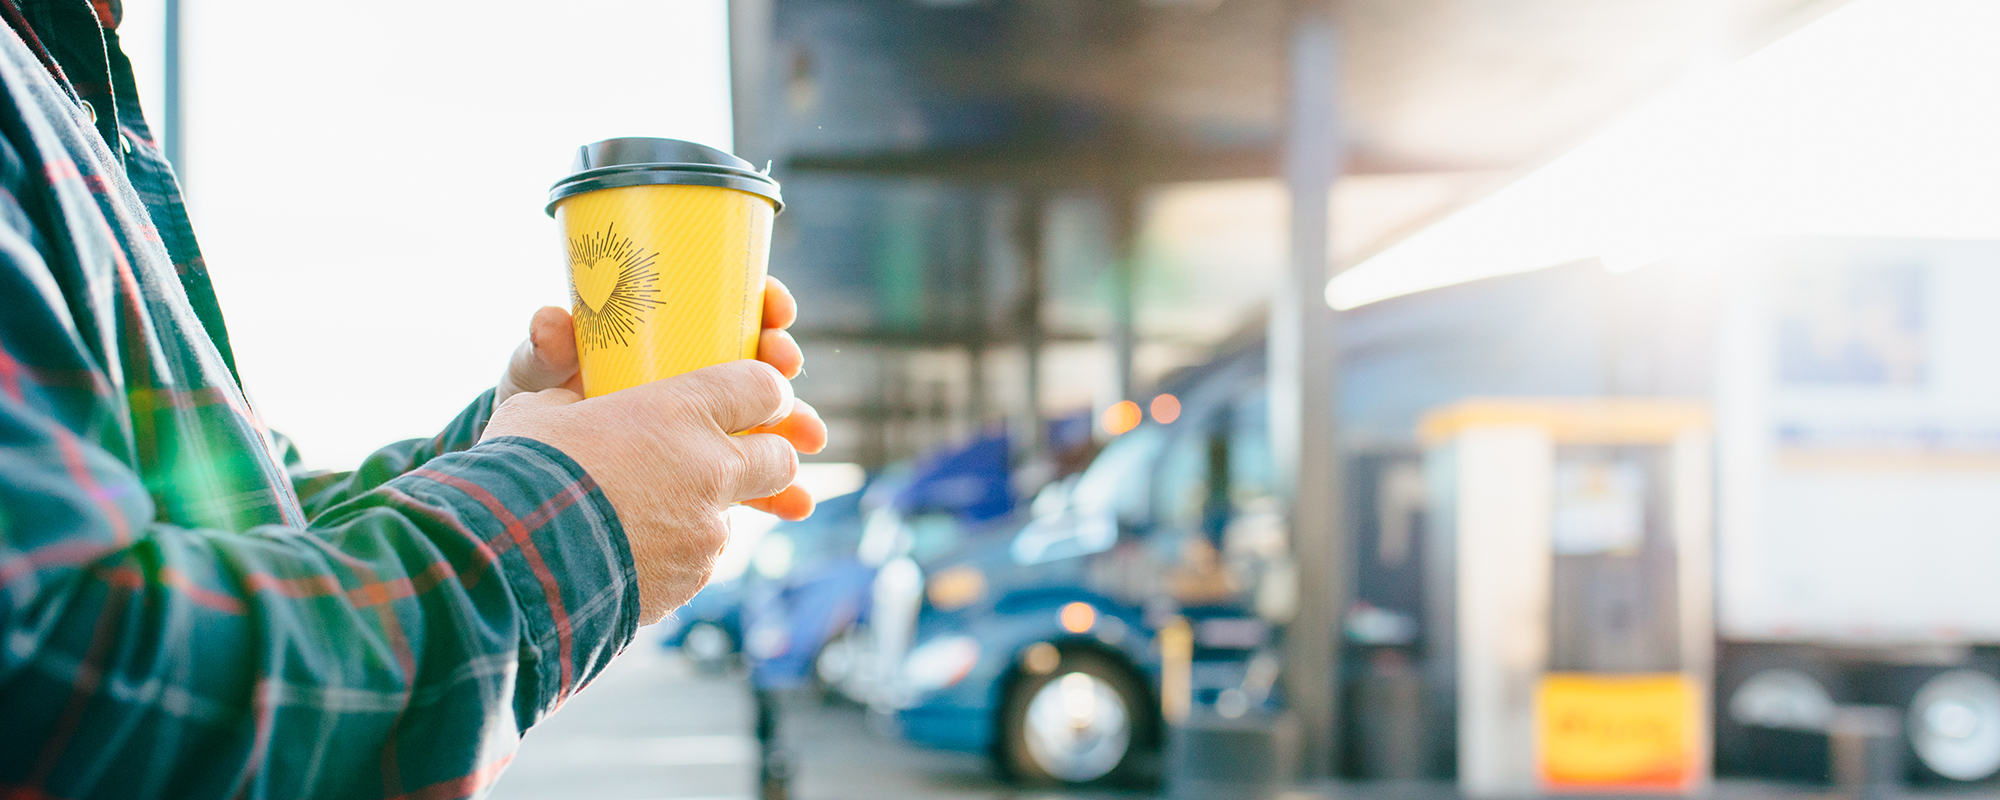 A driver holding a coffee cup in front of the diesel fueling bay 